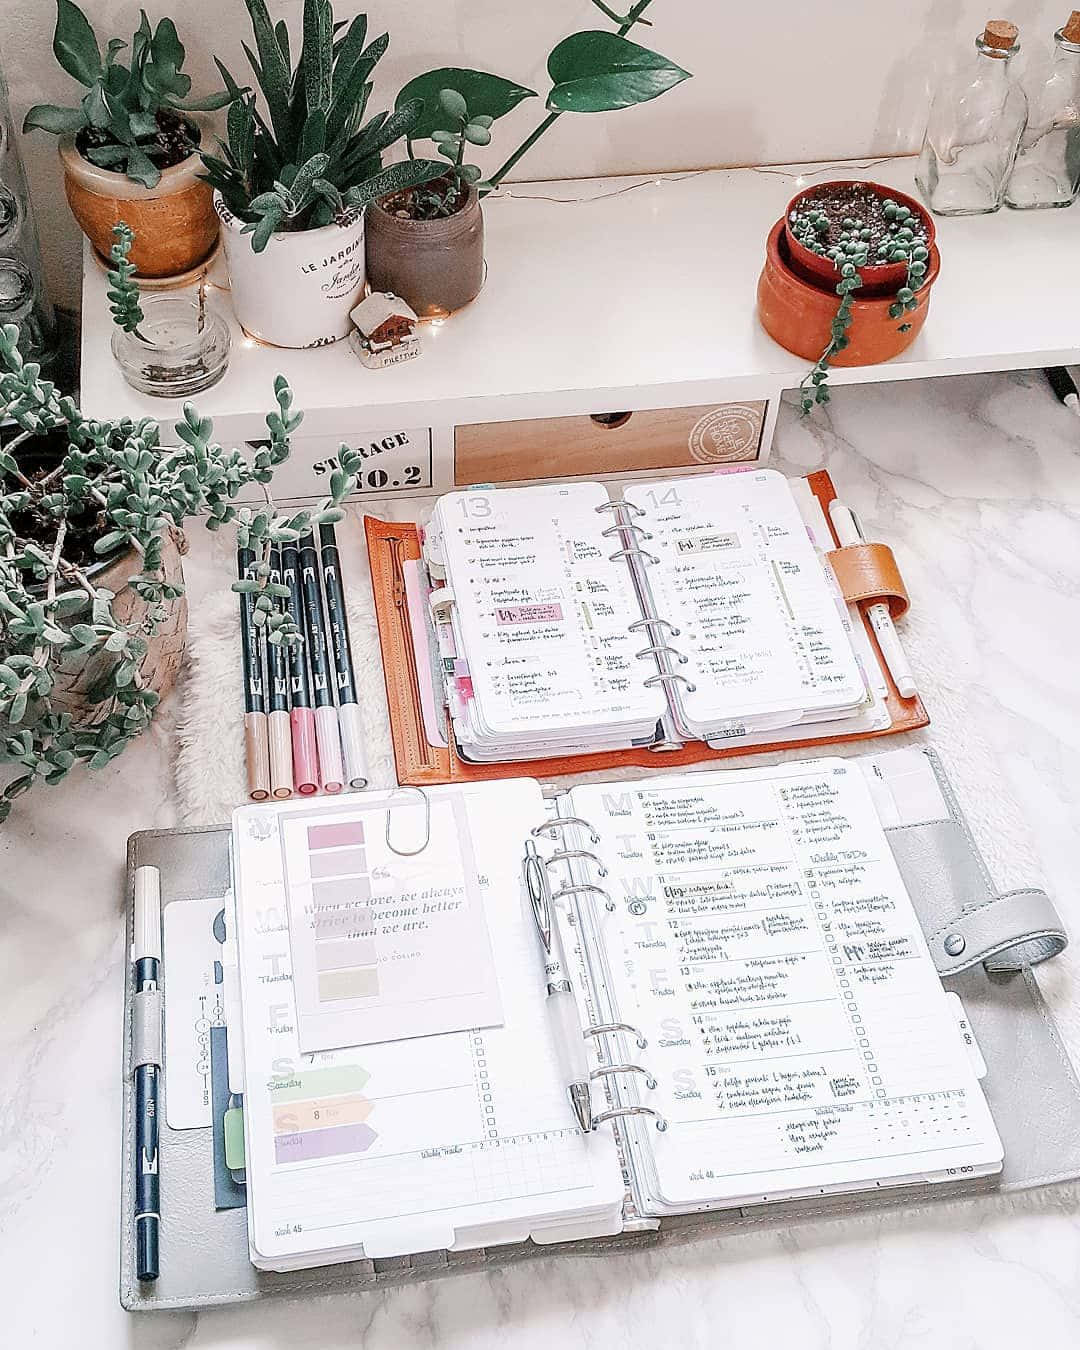 A Desk With A Planner, Planner, And A Plant